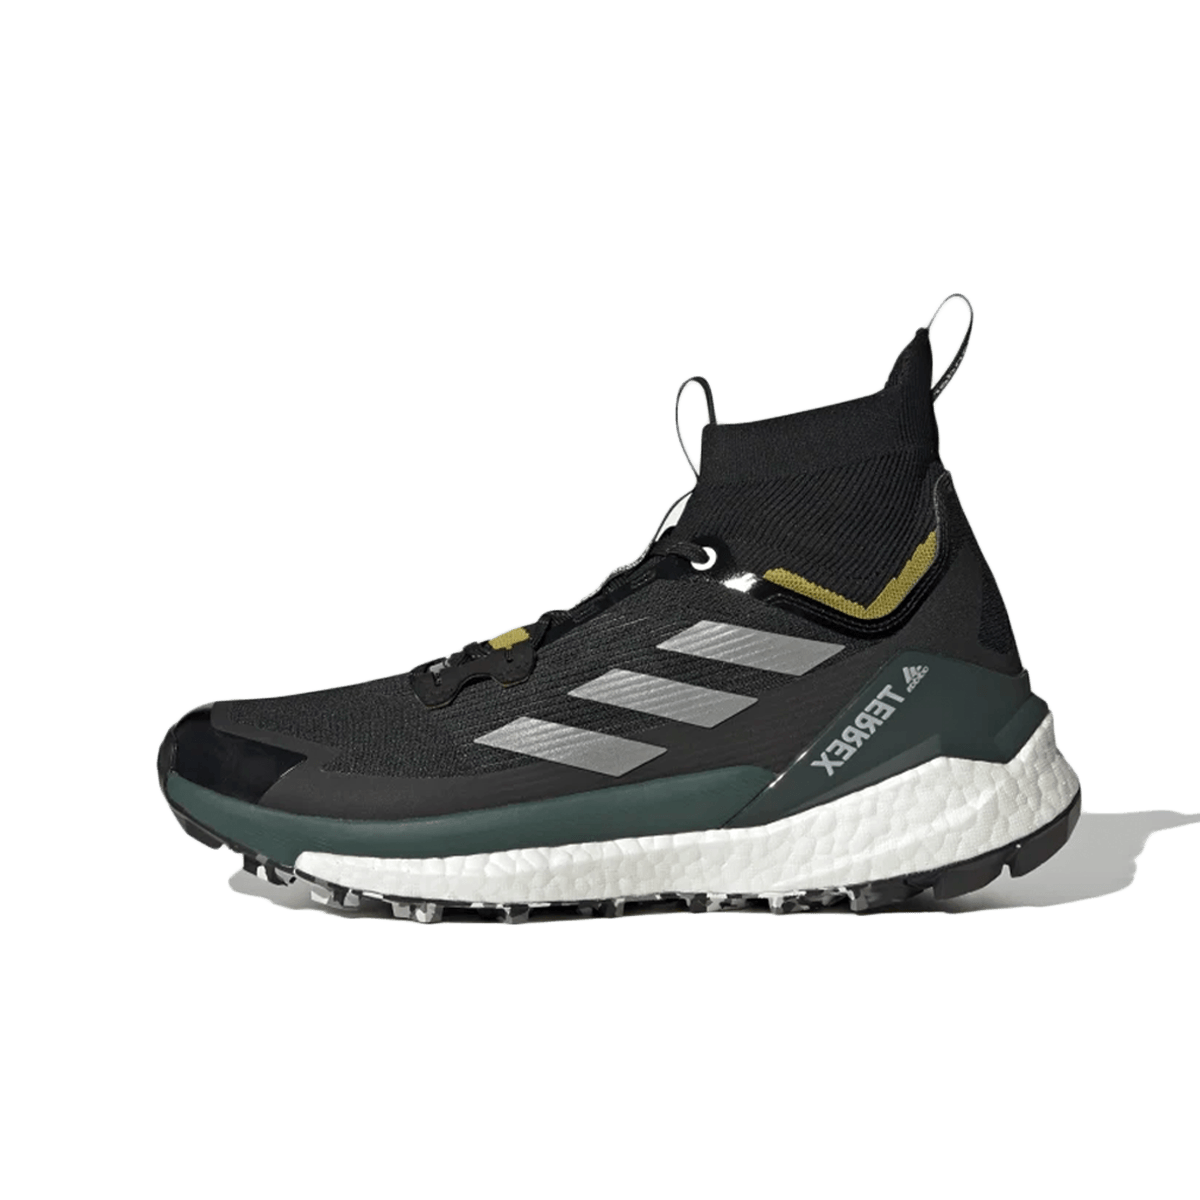 And Wander x adidas Terrex 'Core Black' GY9839